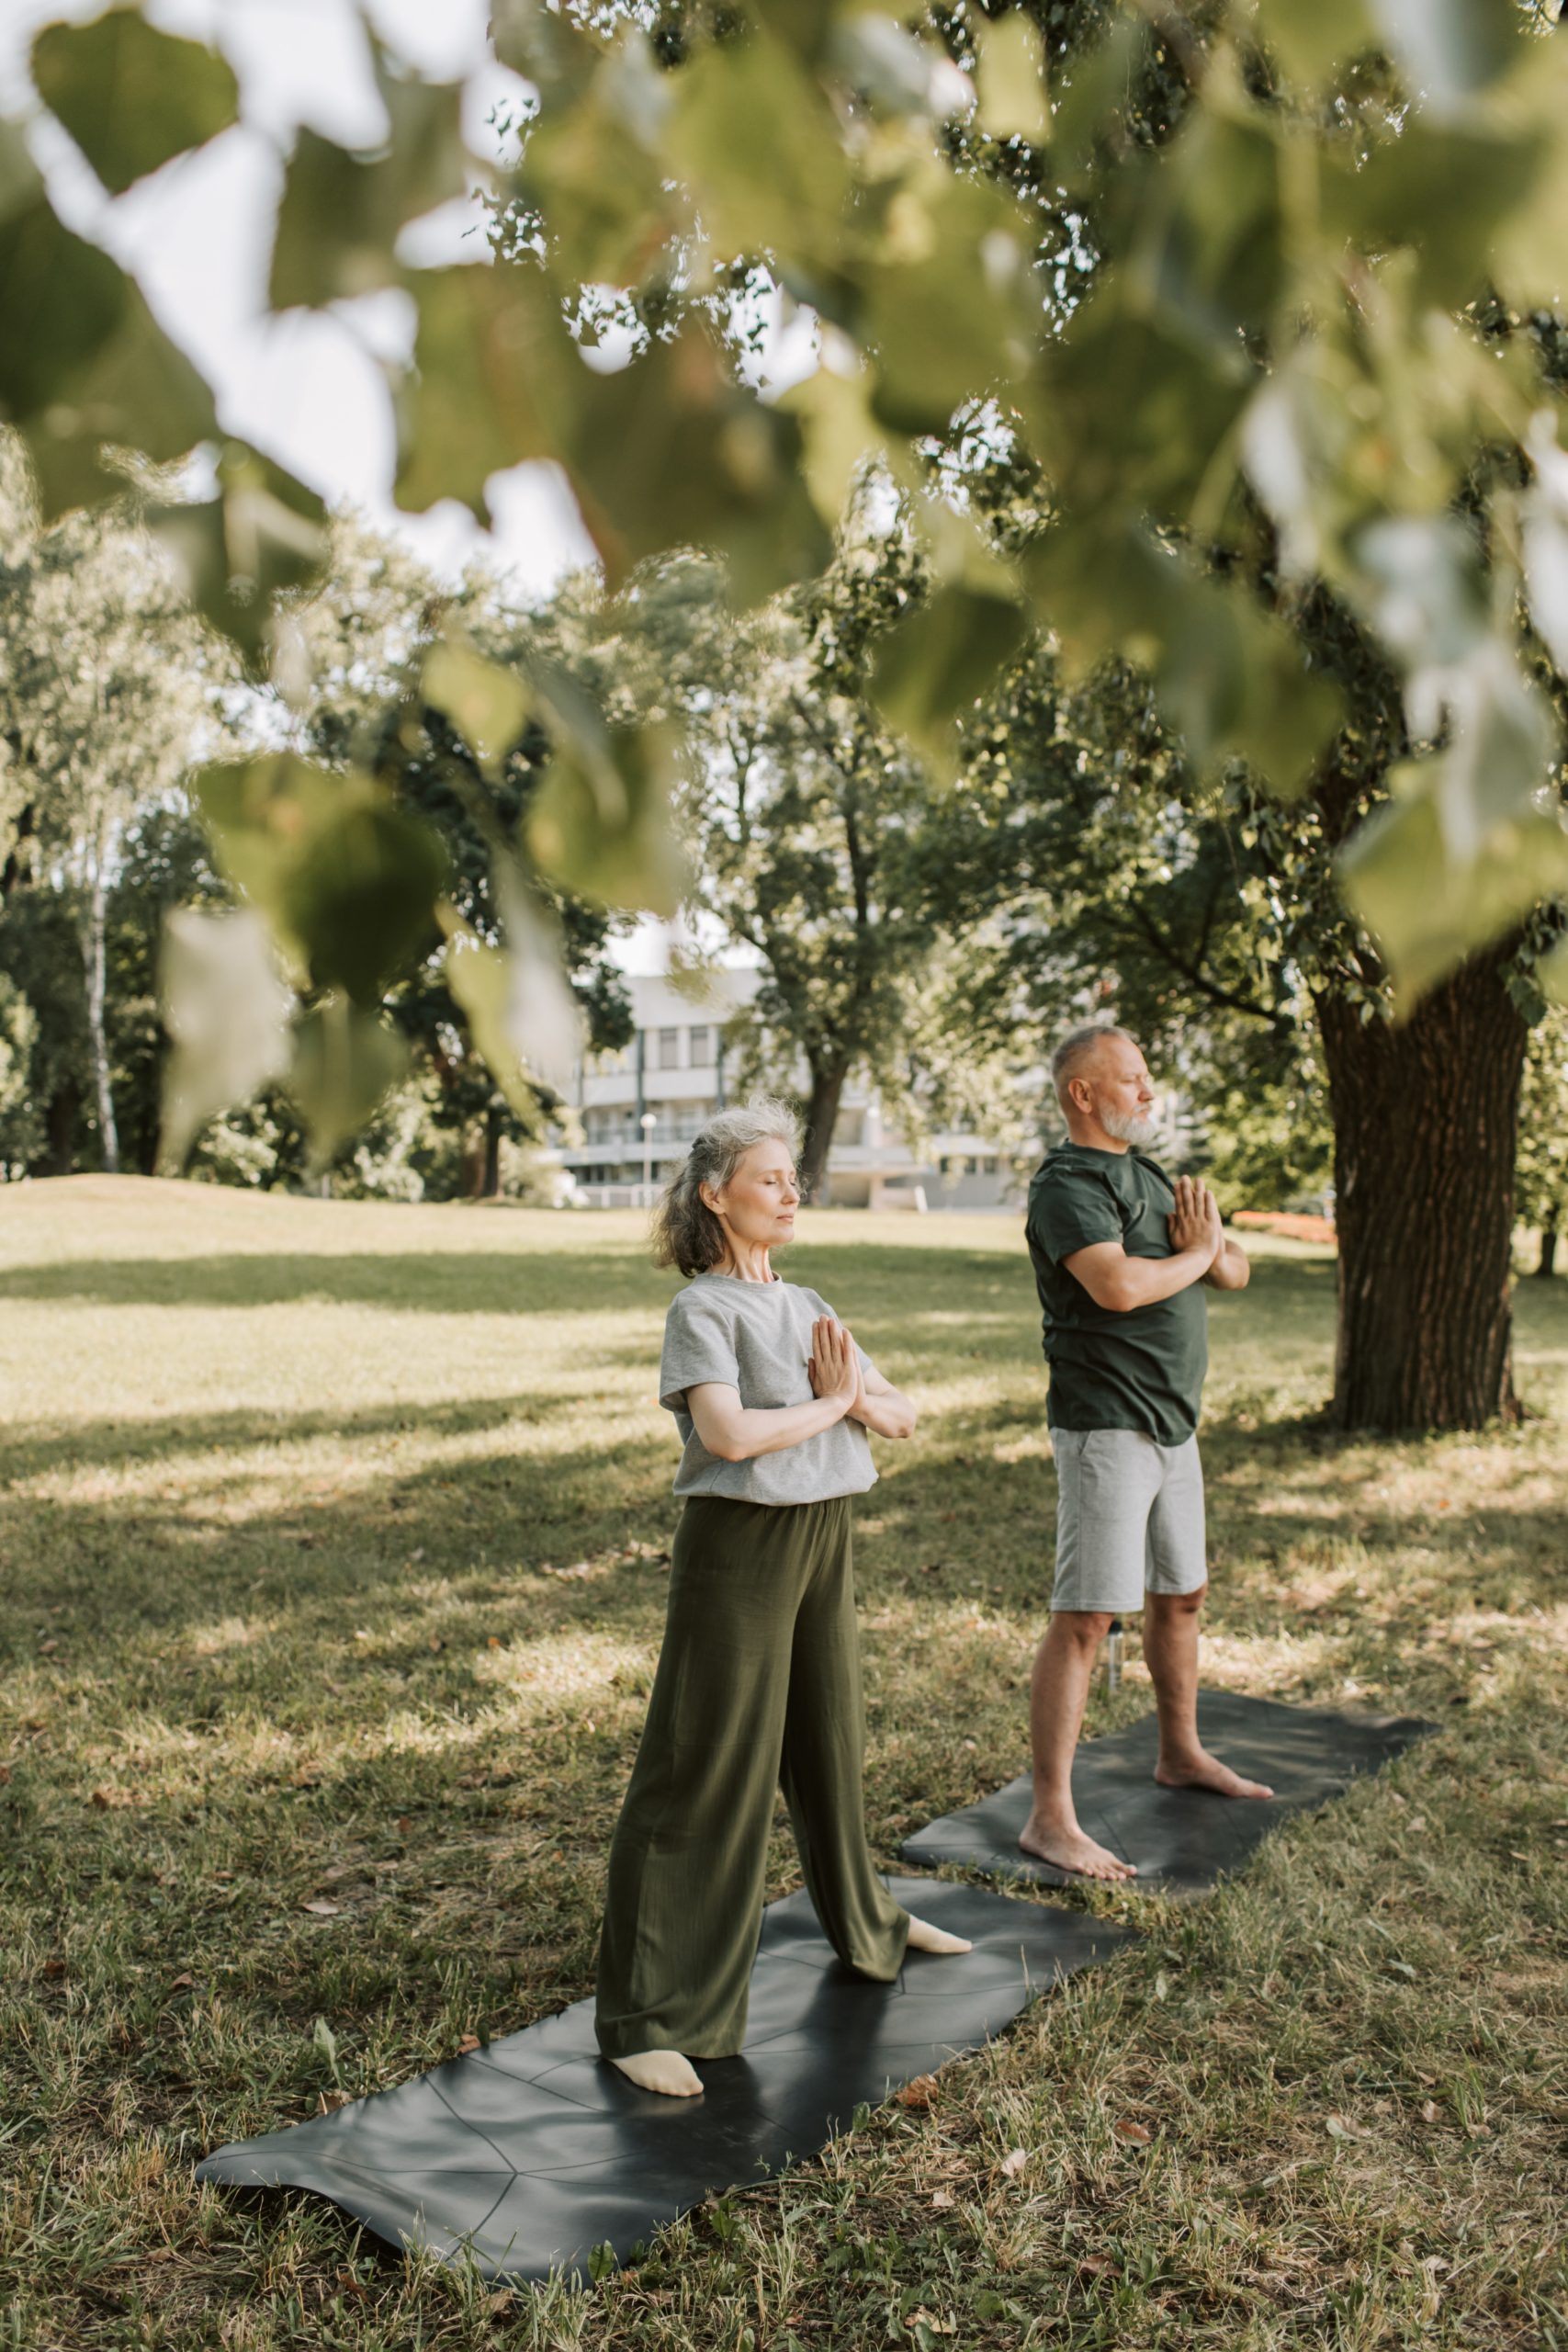 A woman with grey hair and a man with grey hair on a yoga mat outdoors under a tree.